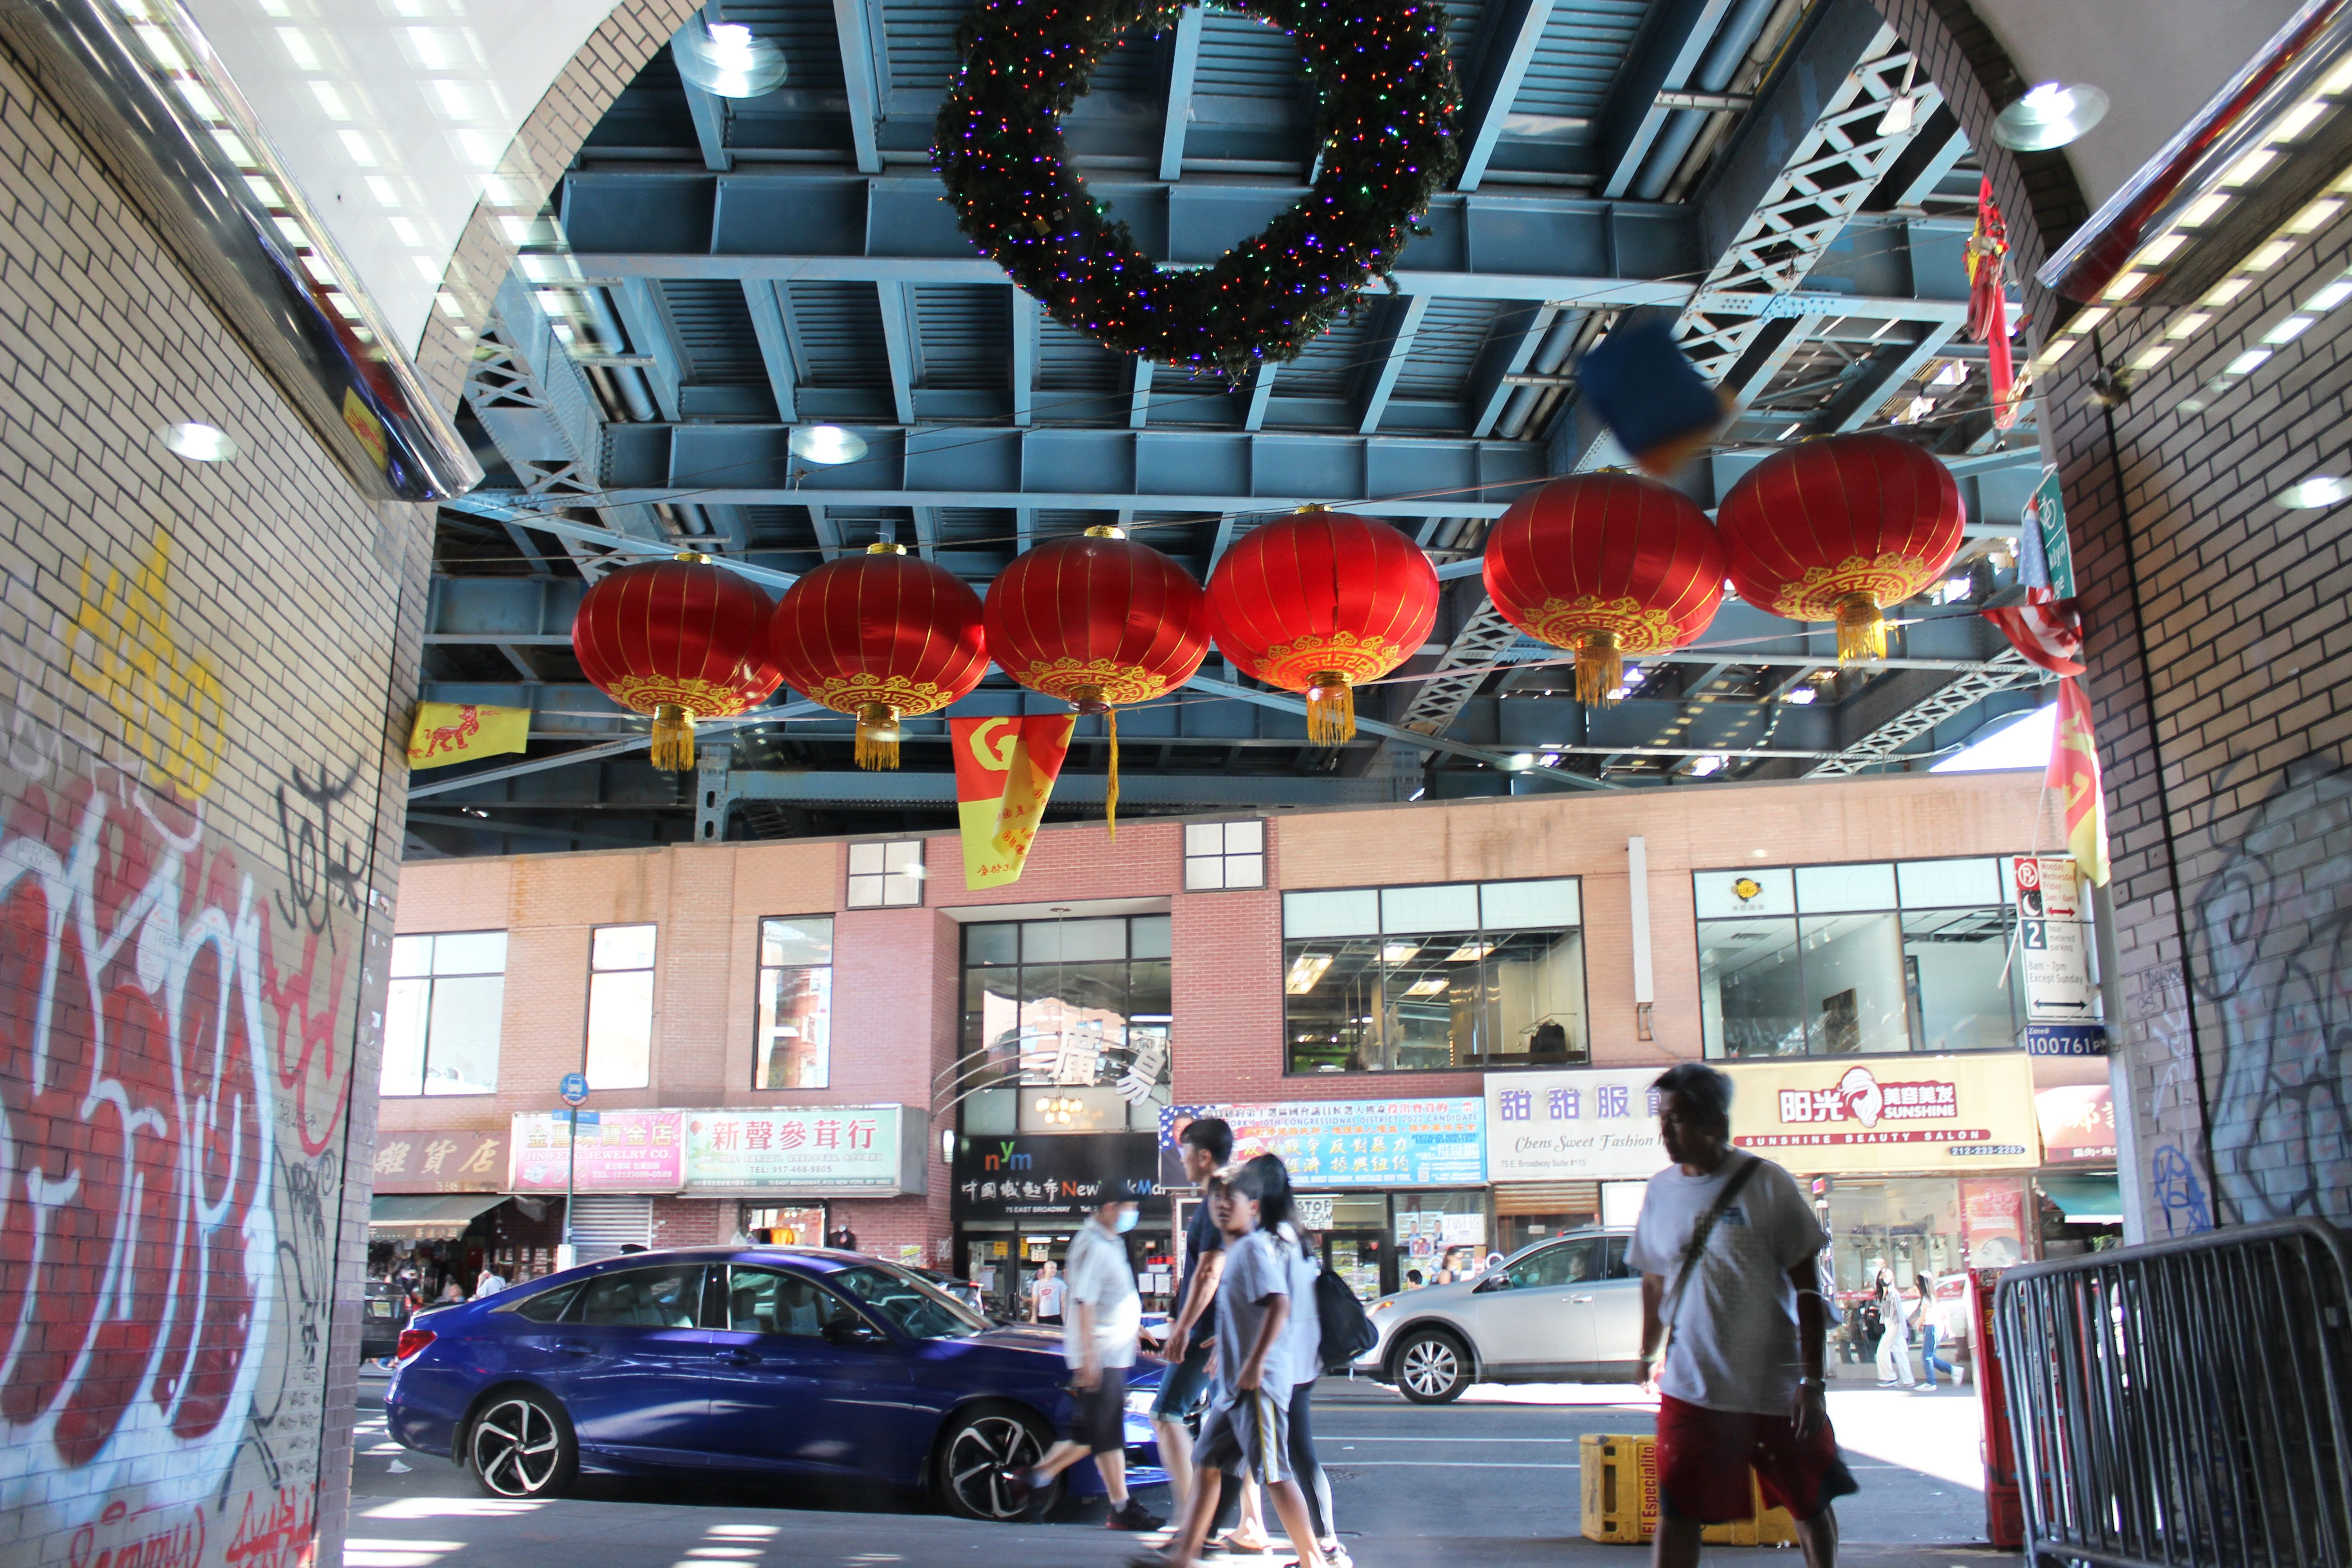 Essential Chinatown New York: A guide to the best basics